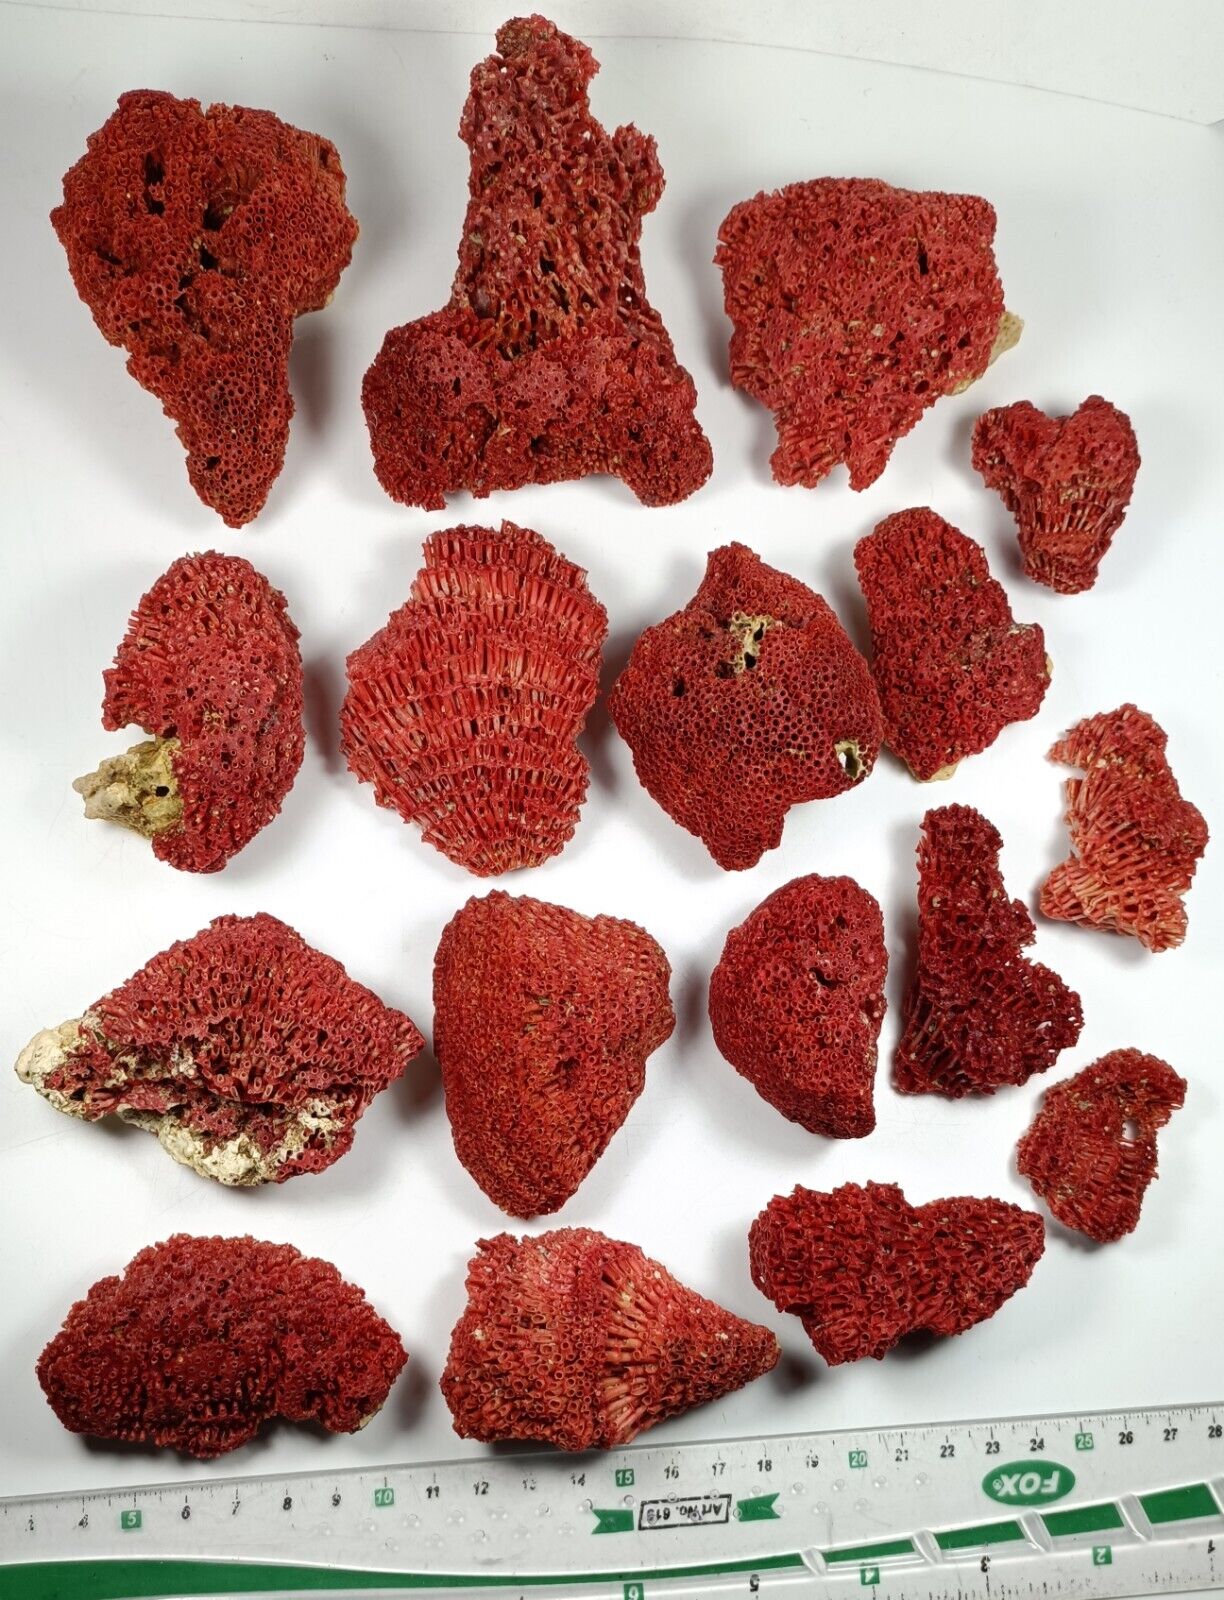 Natural Red Coral Specimens with nice color & formation. 16 pieces lot